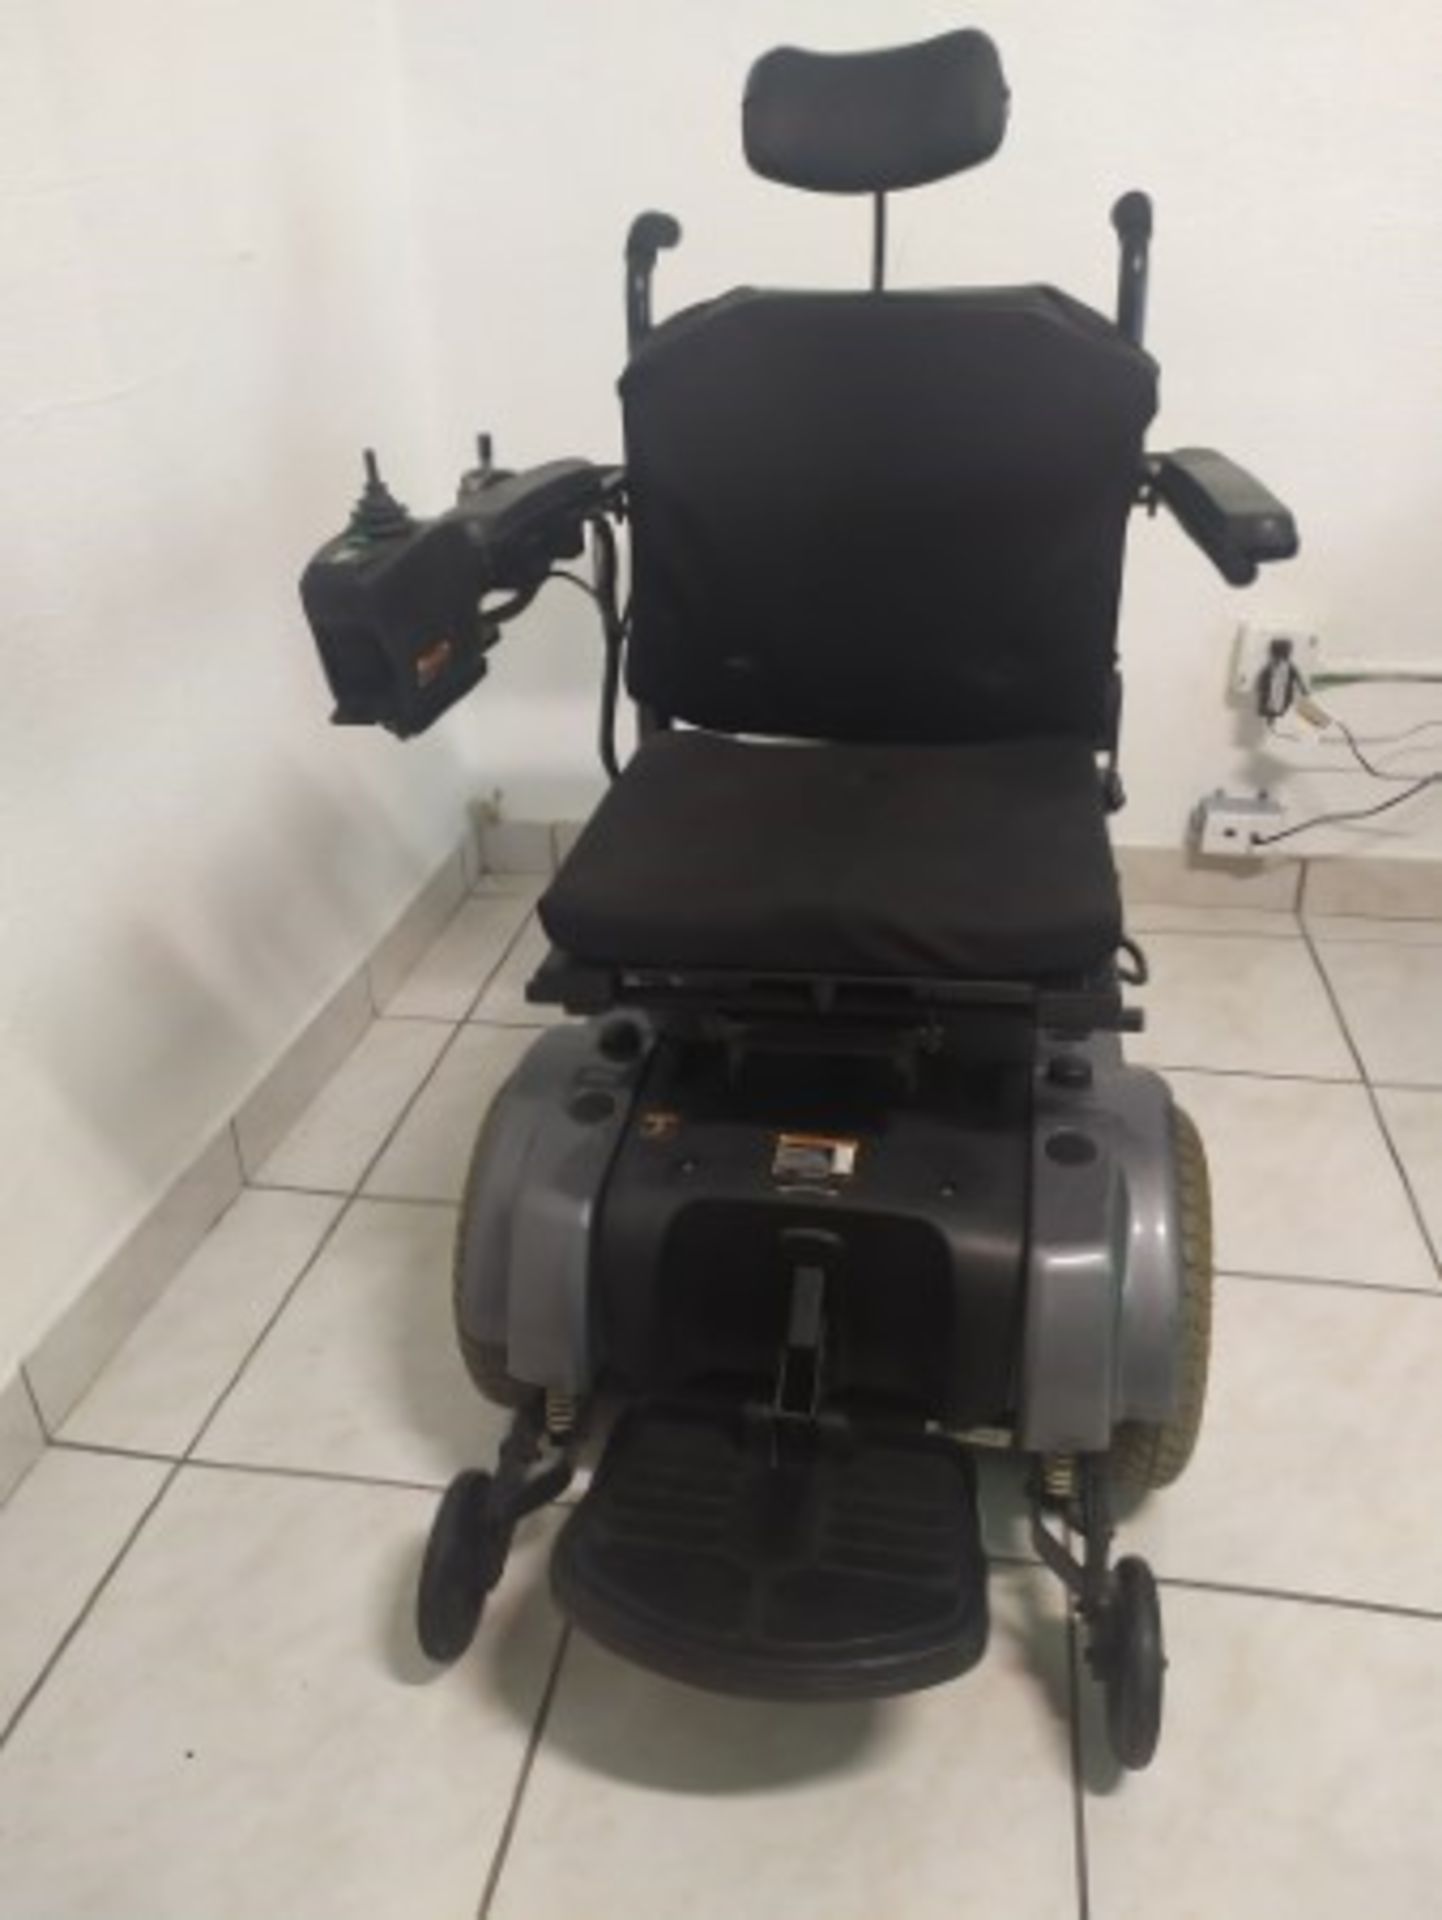 2008 PRIDE JAZZY 1122 6-WHEEL REHAB POWER CHAIR WITH SEAT WITH RAISE & LOWER FEATURES - GRAY - 300LB